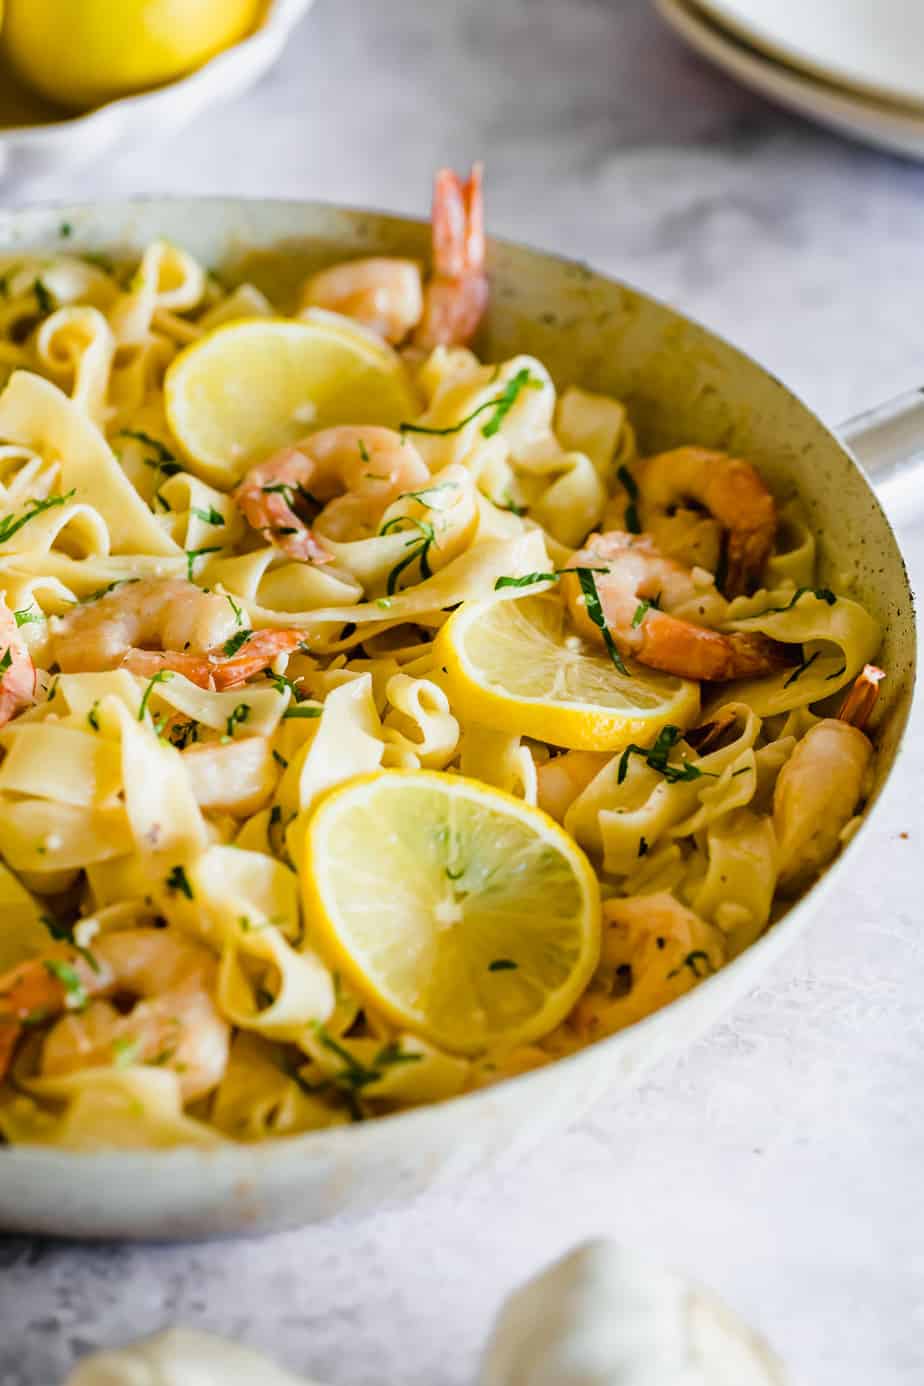 A skillet with pasta coted in cream and herbs with lemon and shrimp.